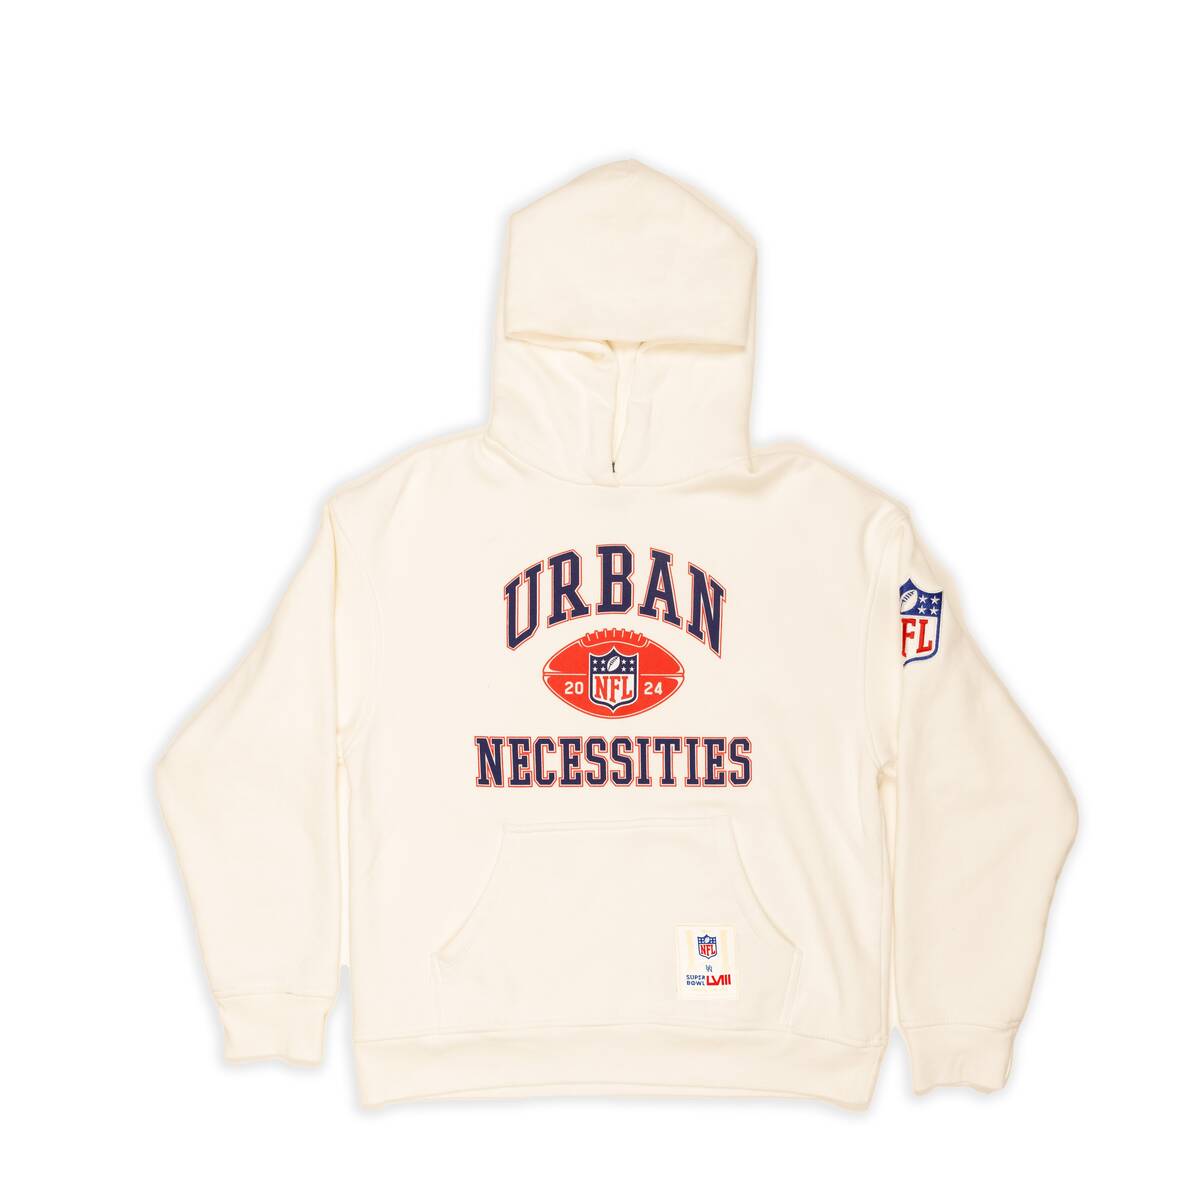 A sweatshirt designed by the Las Vegas based Urban Necessities for the Origins: an NFL collecti ...